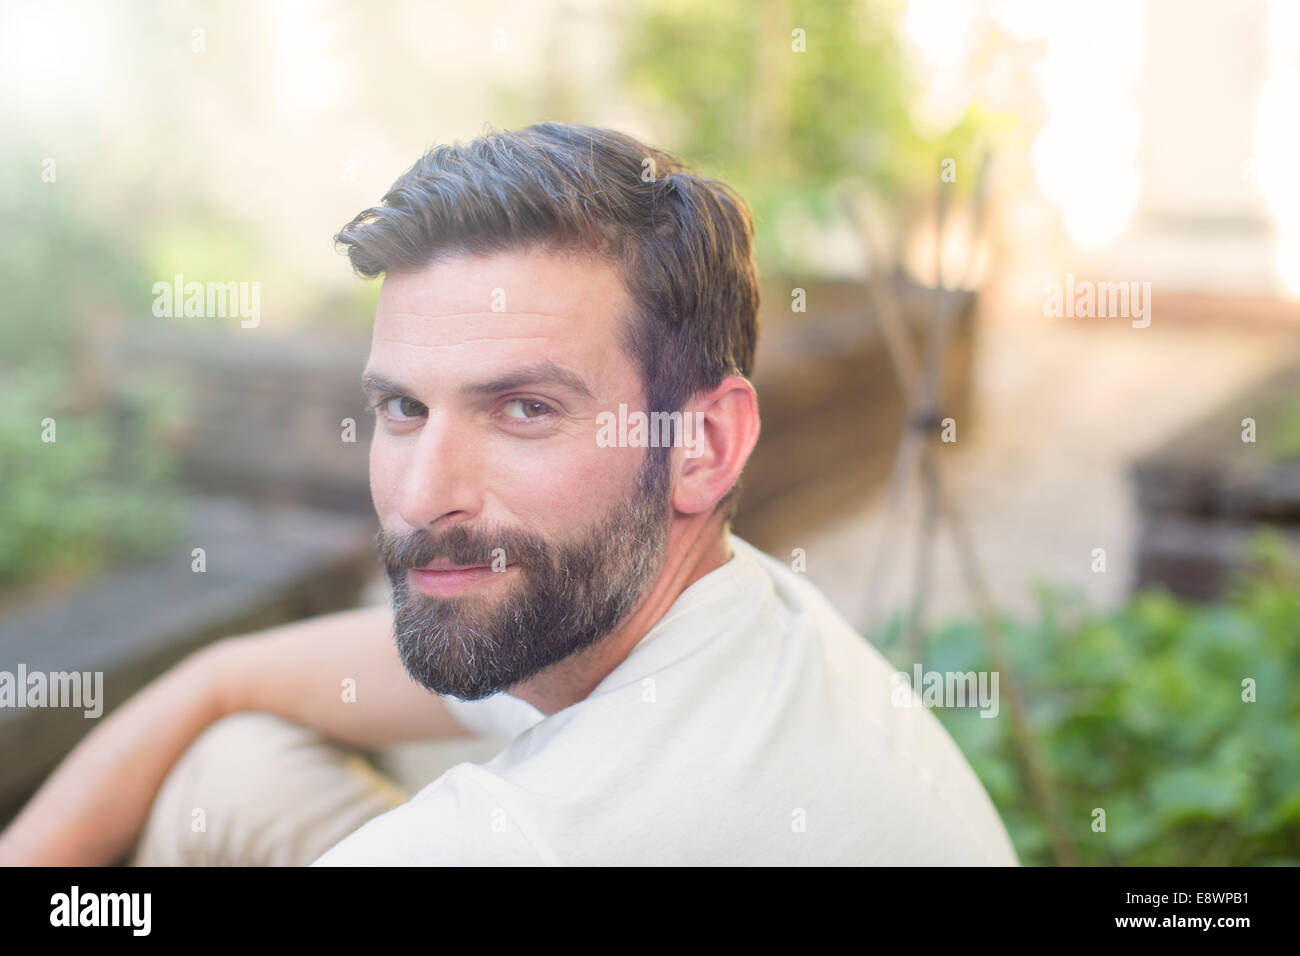 Close up of man smiling in backyard Stock Photo